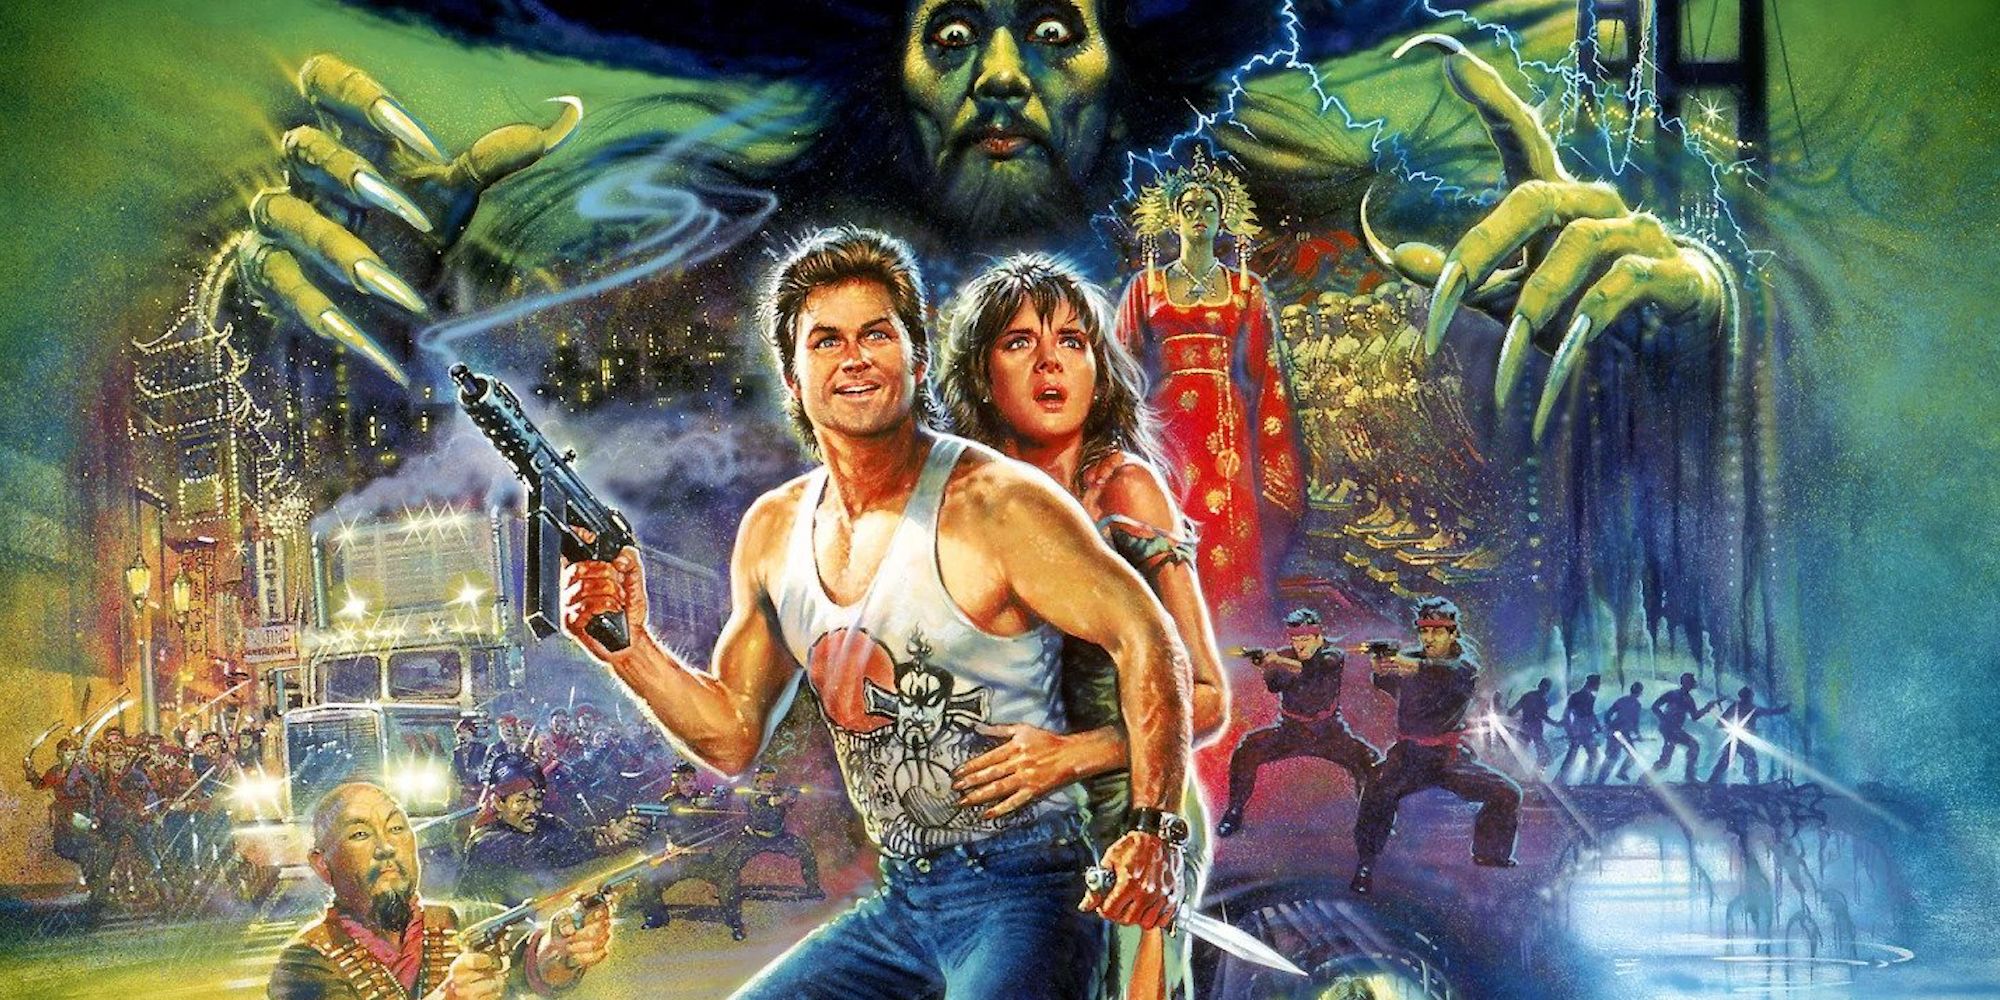 big trouble in little china0